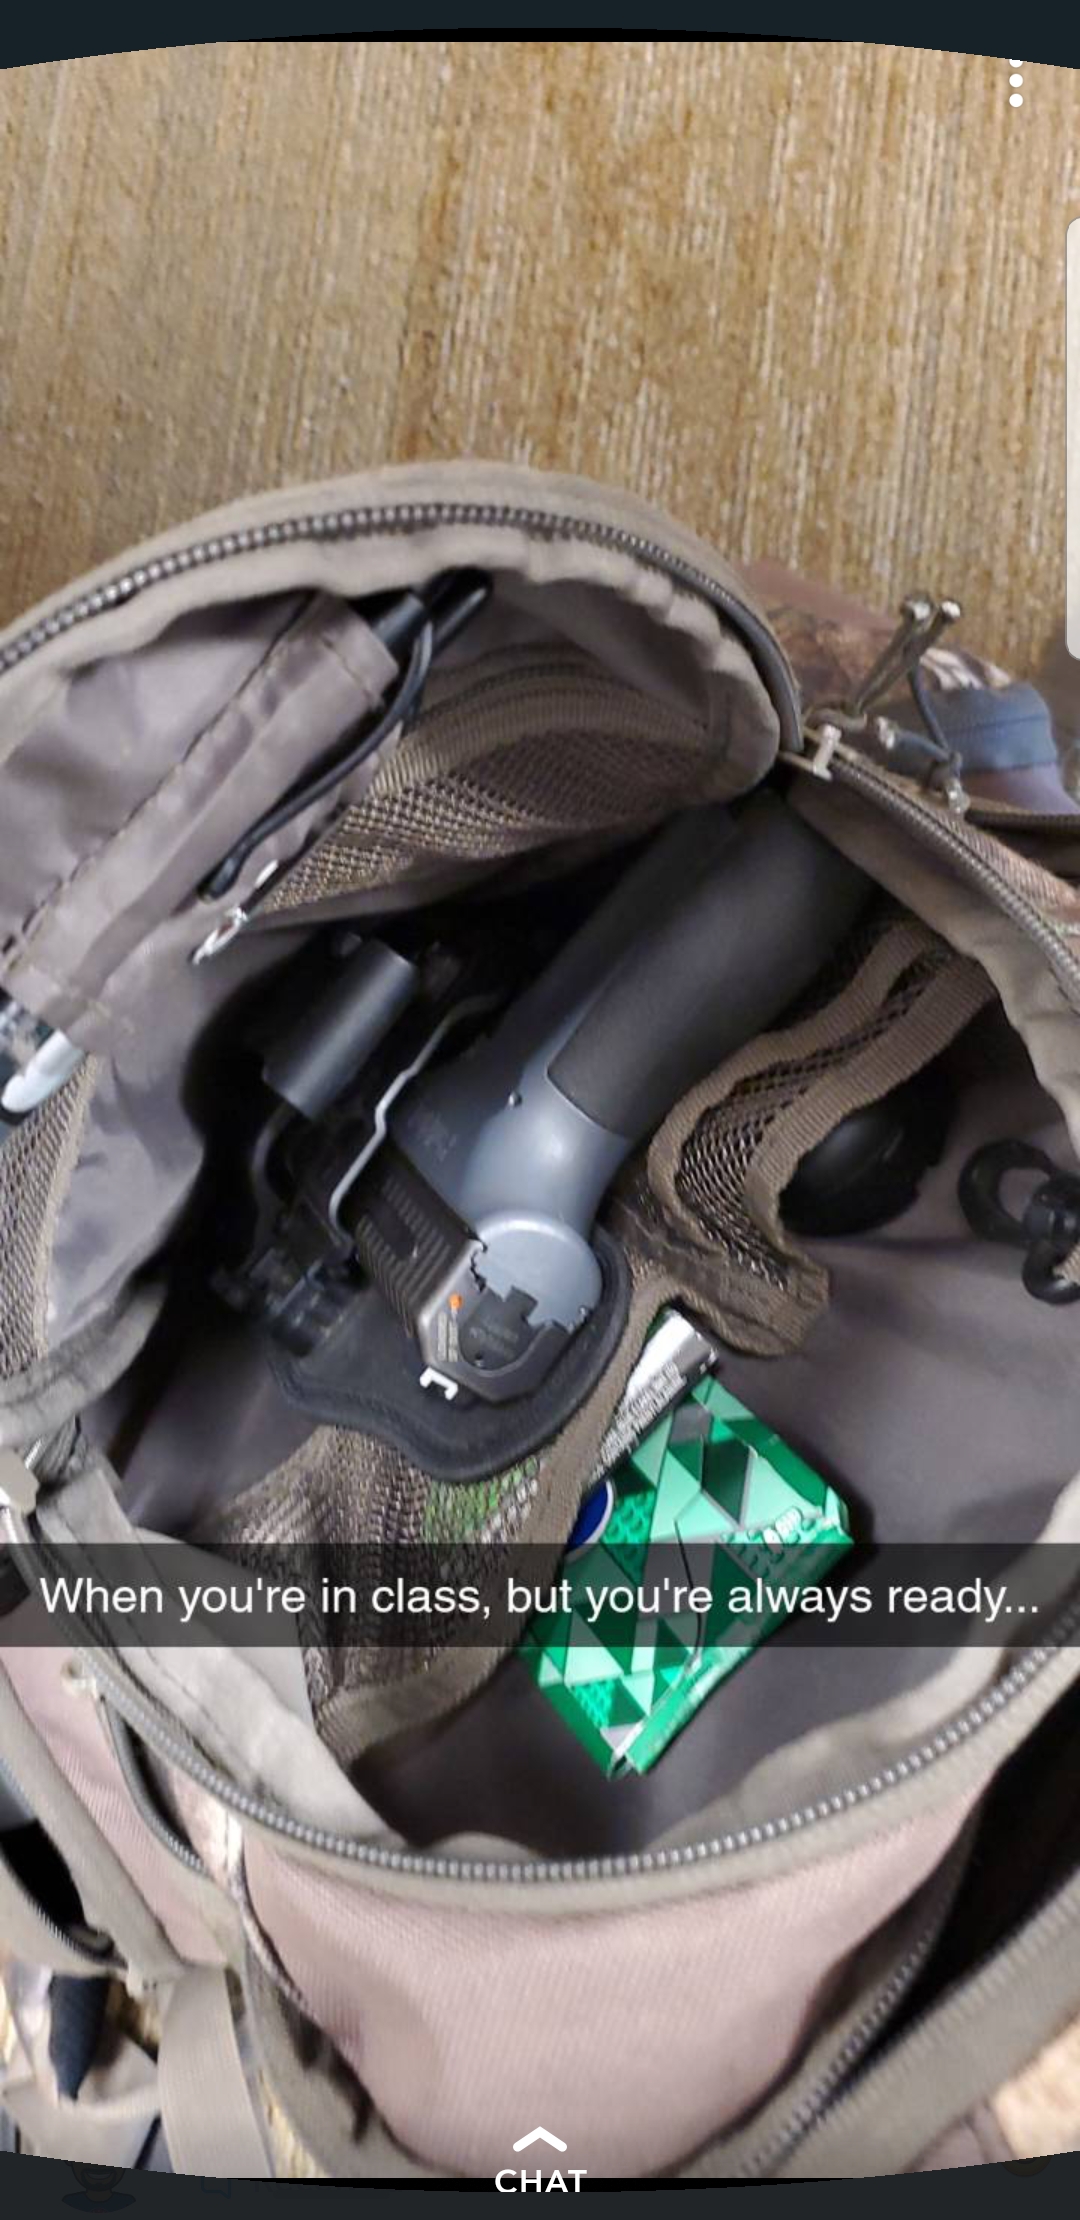 bag - When you're in class, but you're always ready...